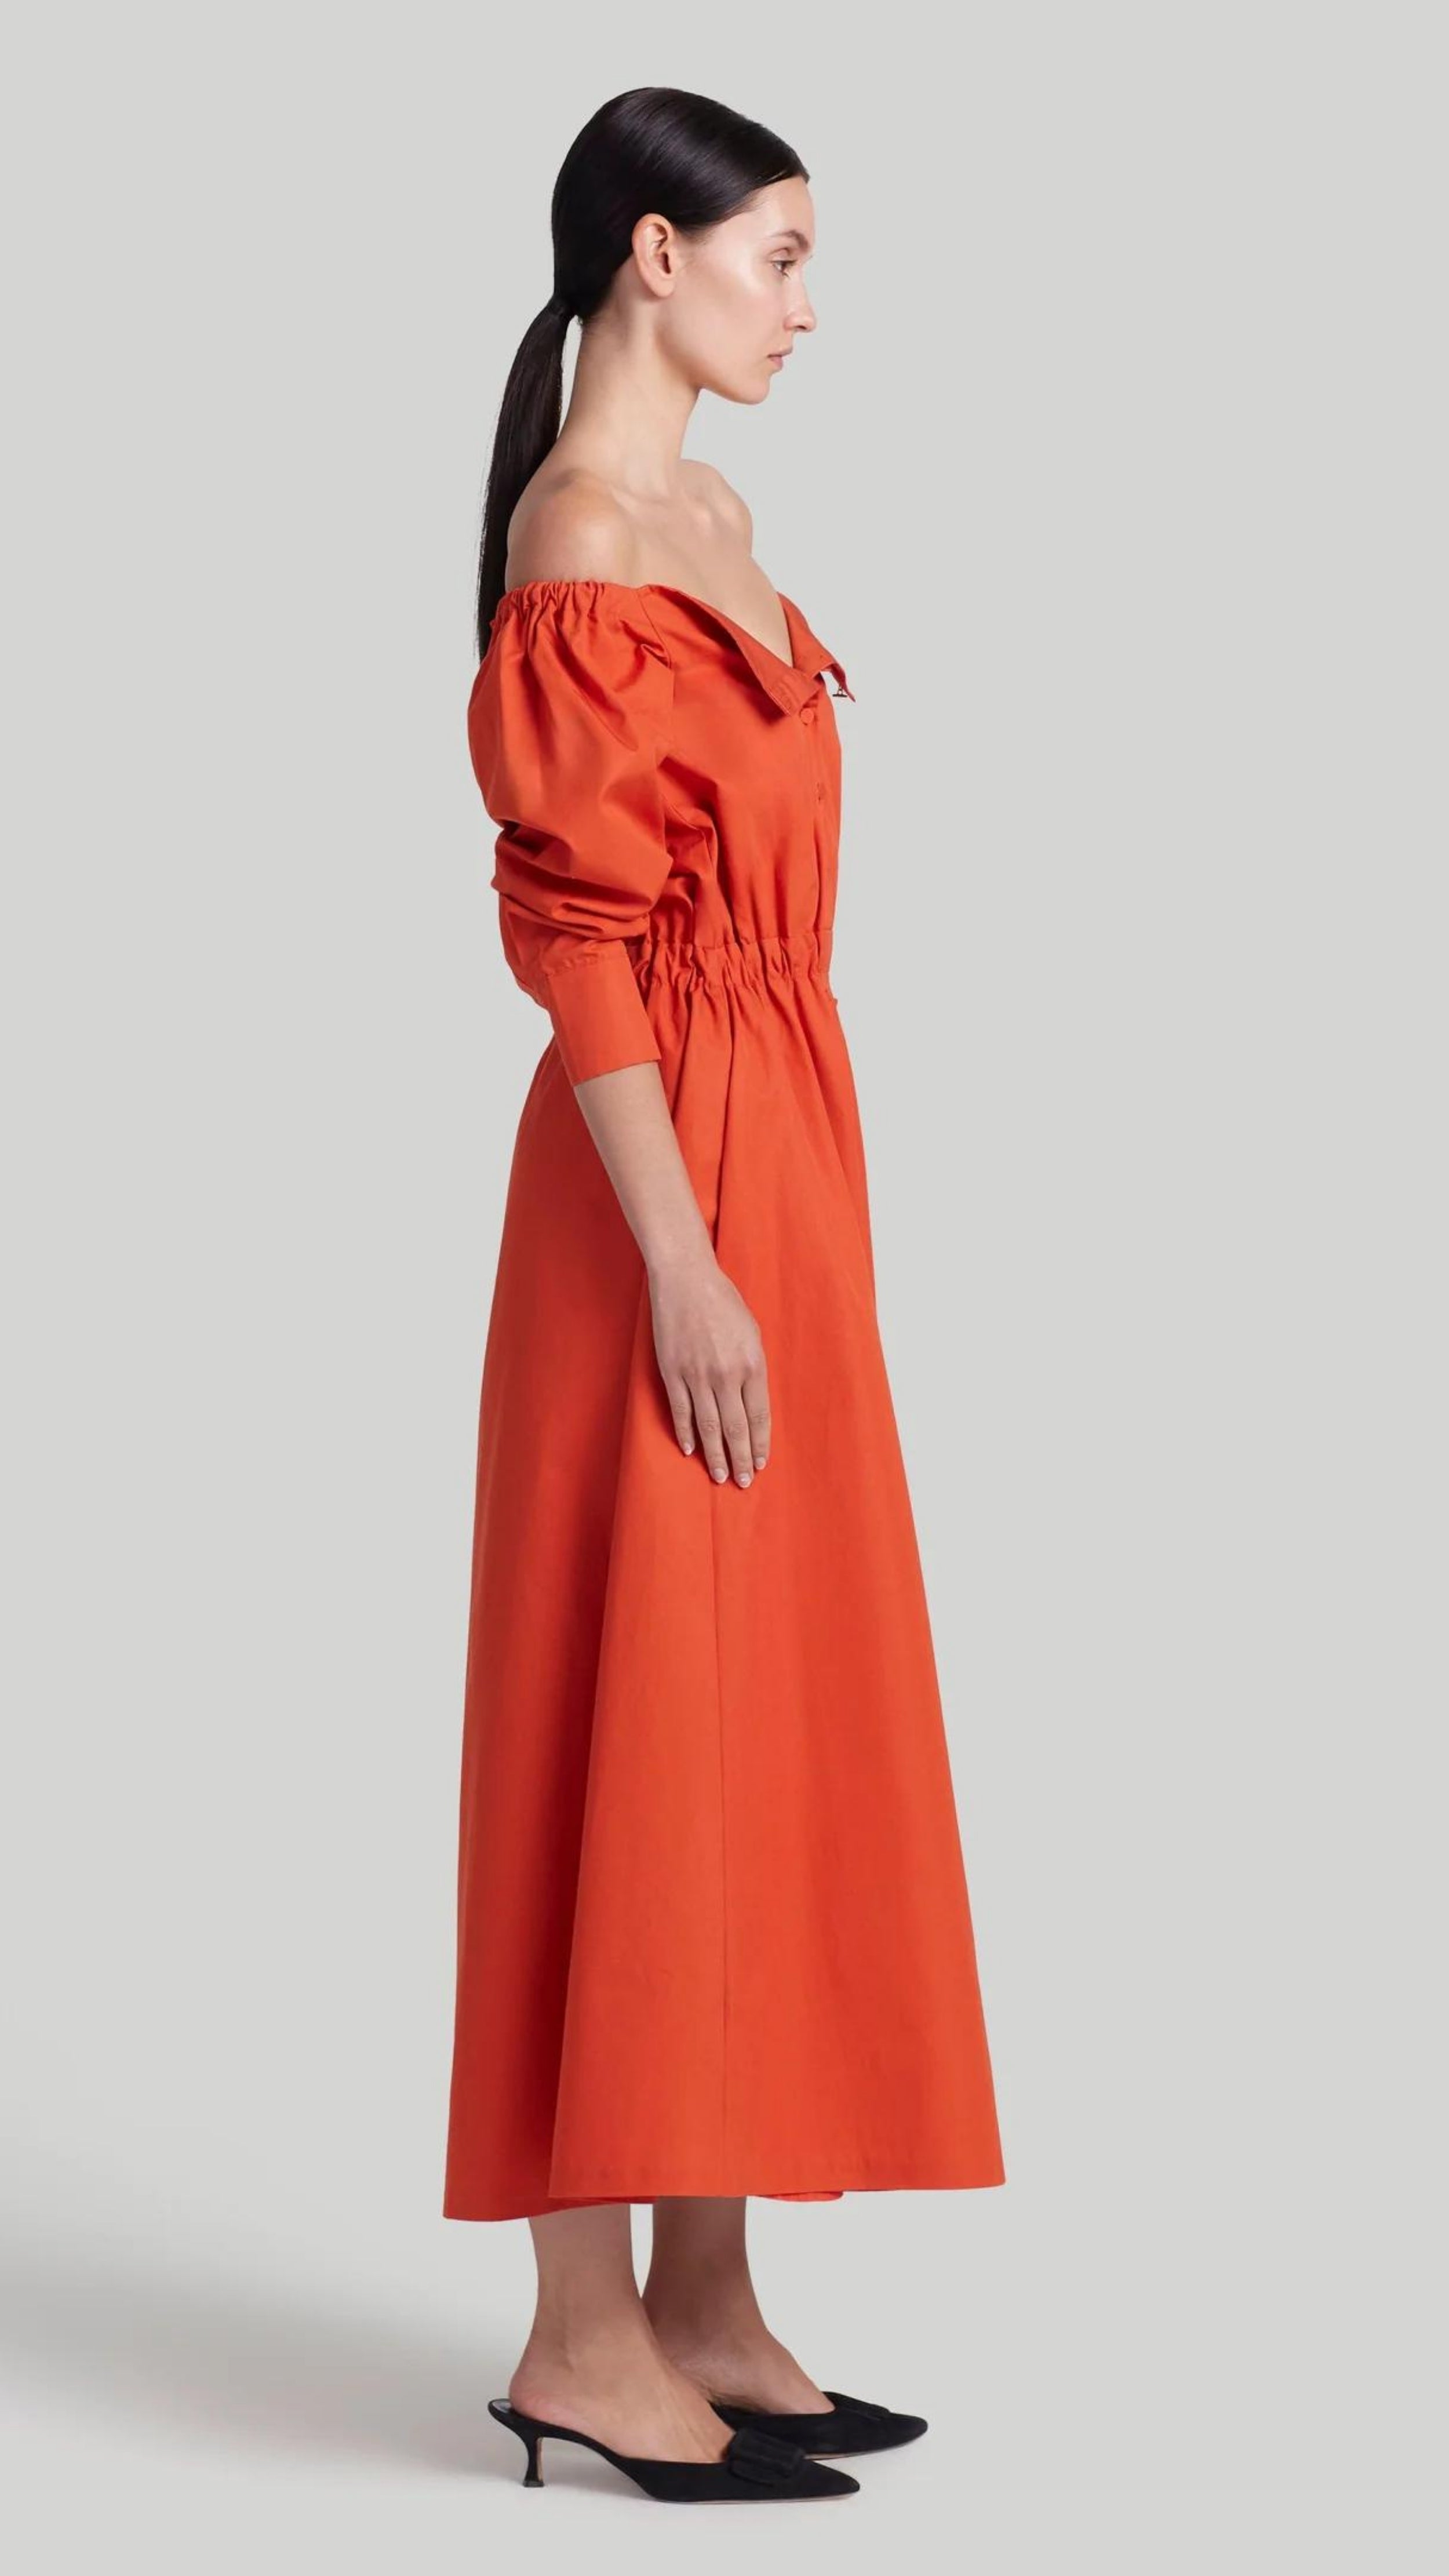 Altuzarra Zora dress shirt dress style soft cotton midi dress in red orange color. Made in Italy. The dress has off the shoulder neckline, puff sleeves and an elasticated waist waistband. Shown on model facing side